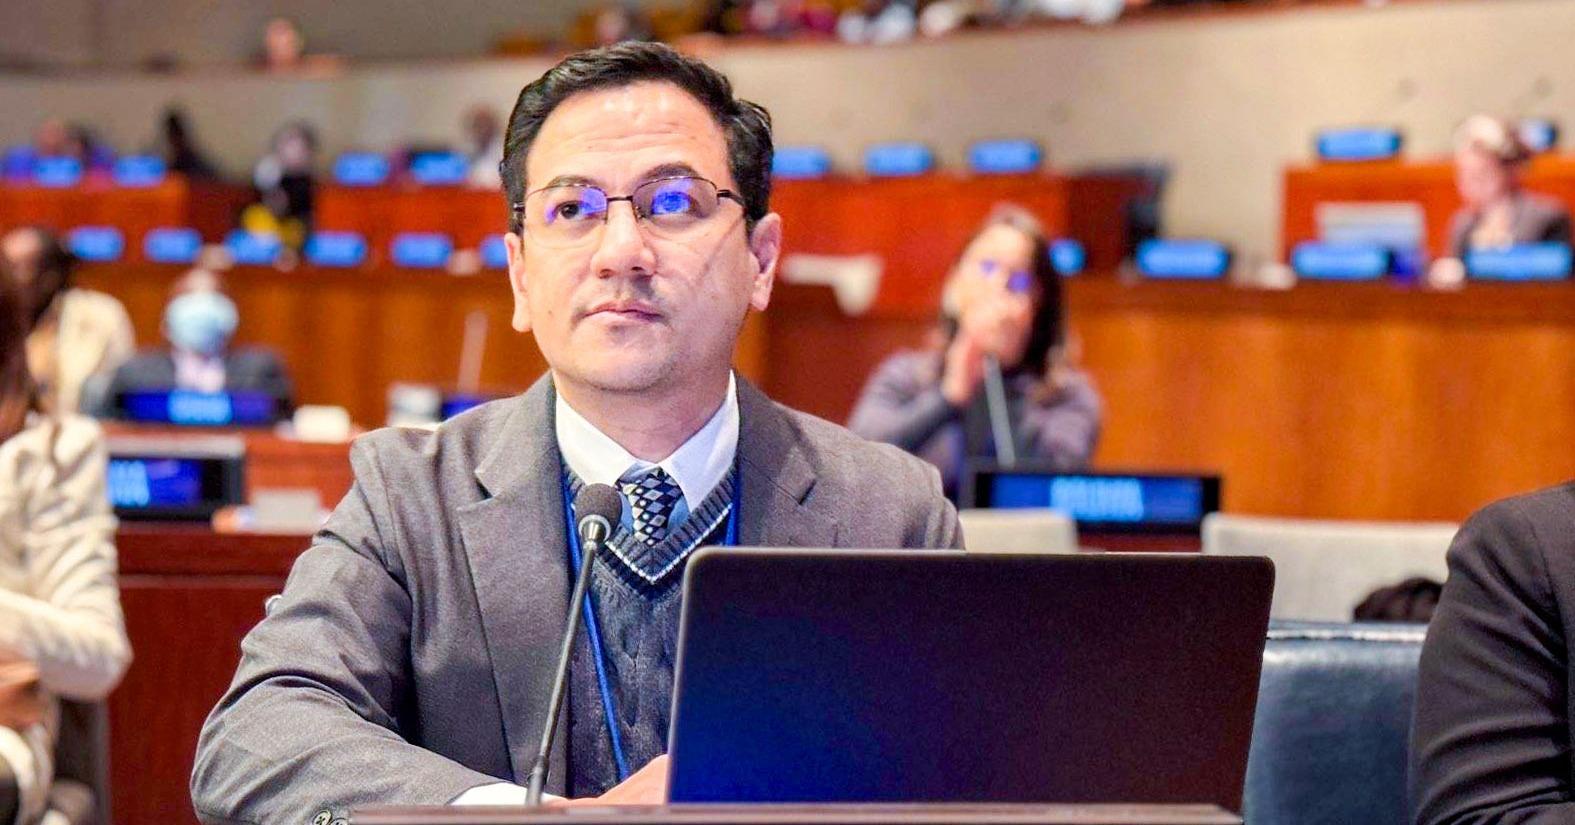 DOST official shares PH efforts on gender digital gap and AI education for women at international conference image